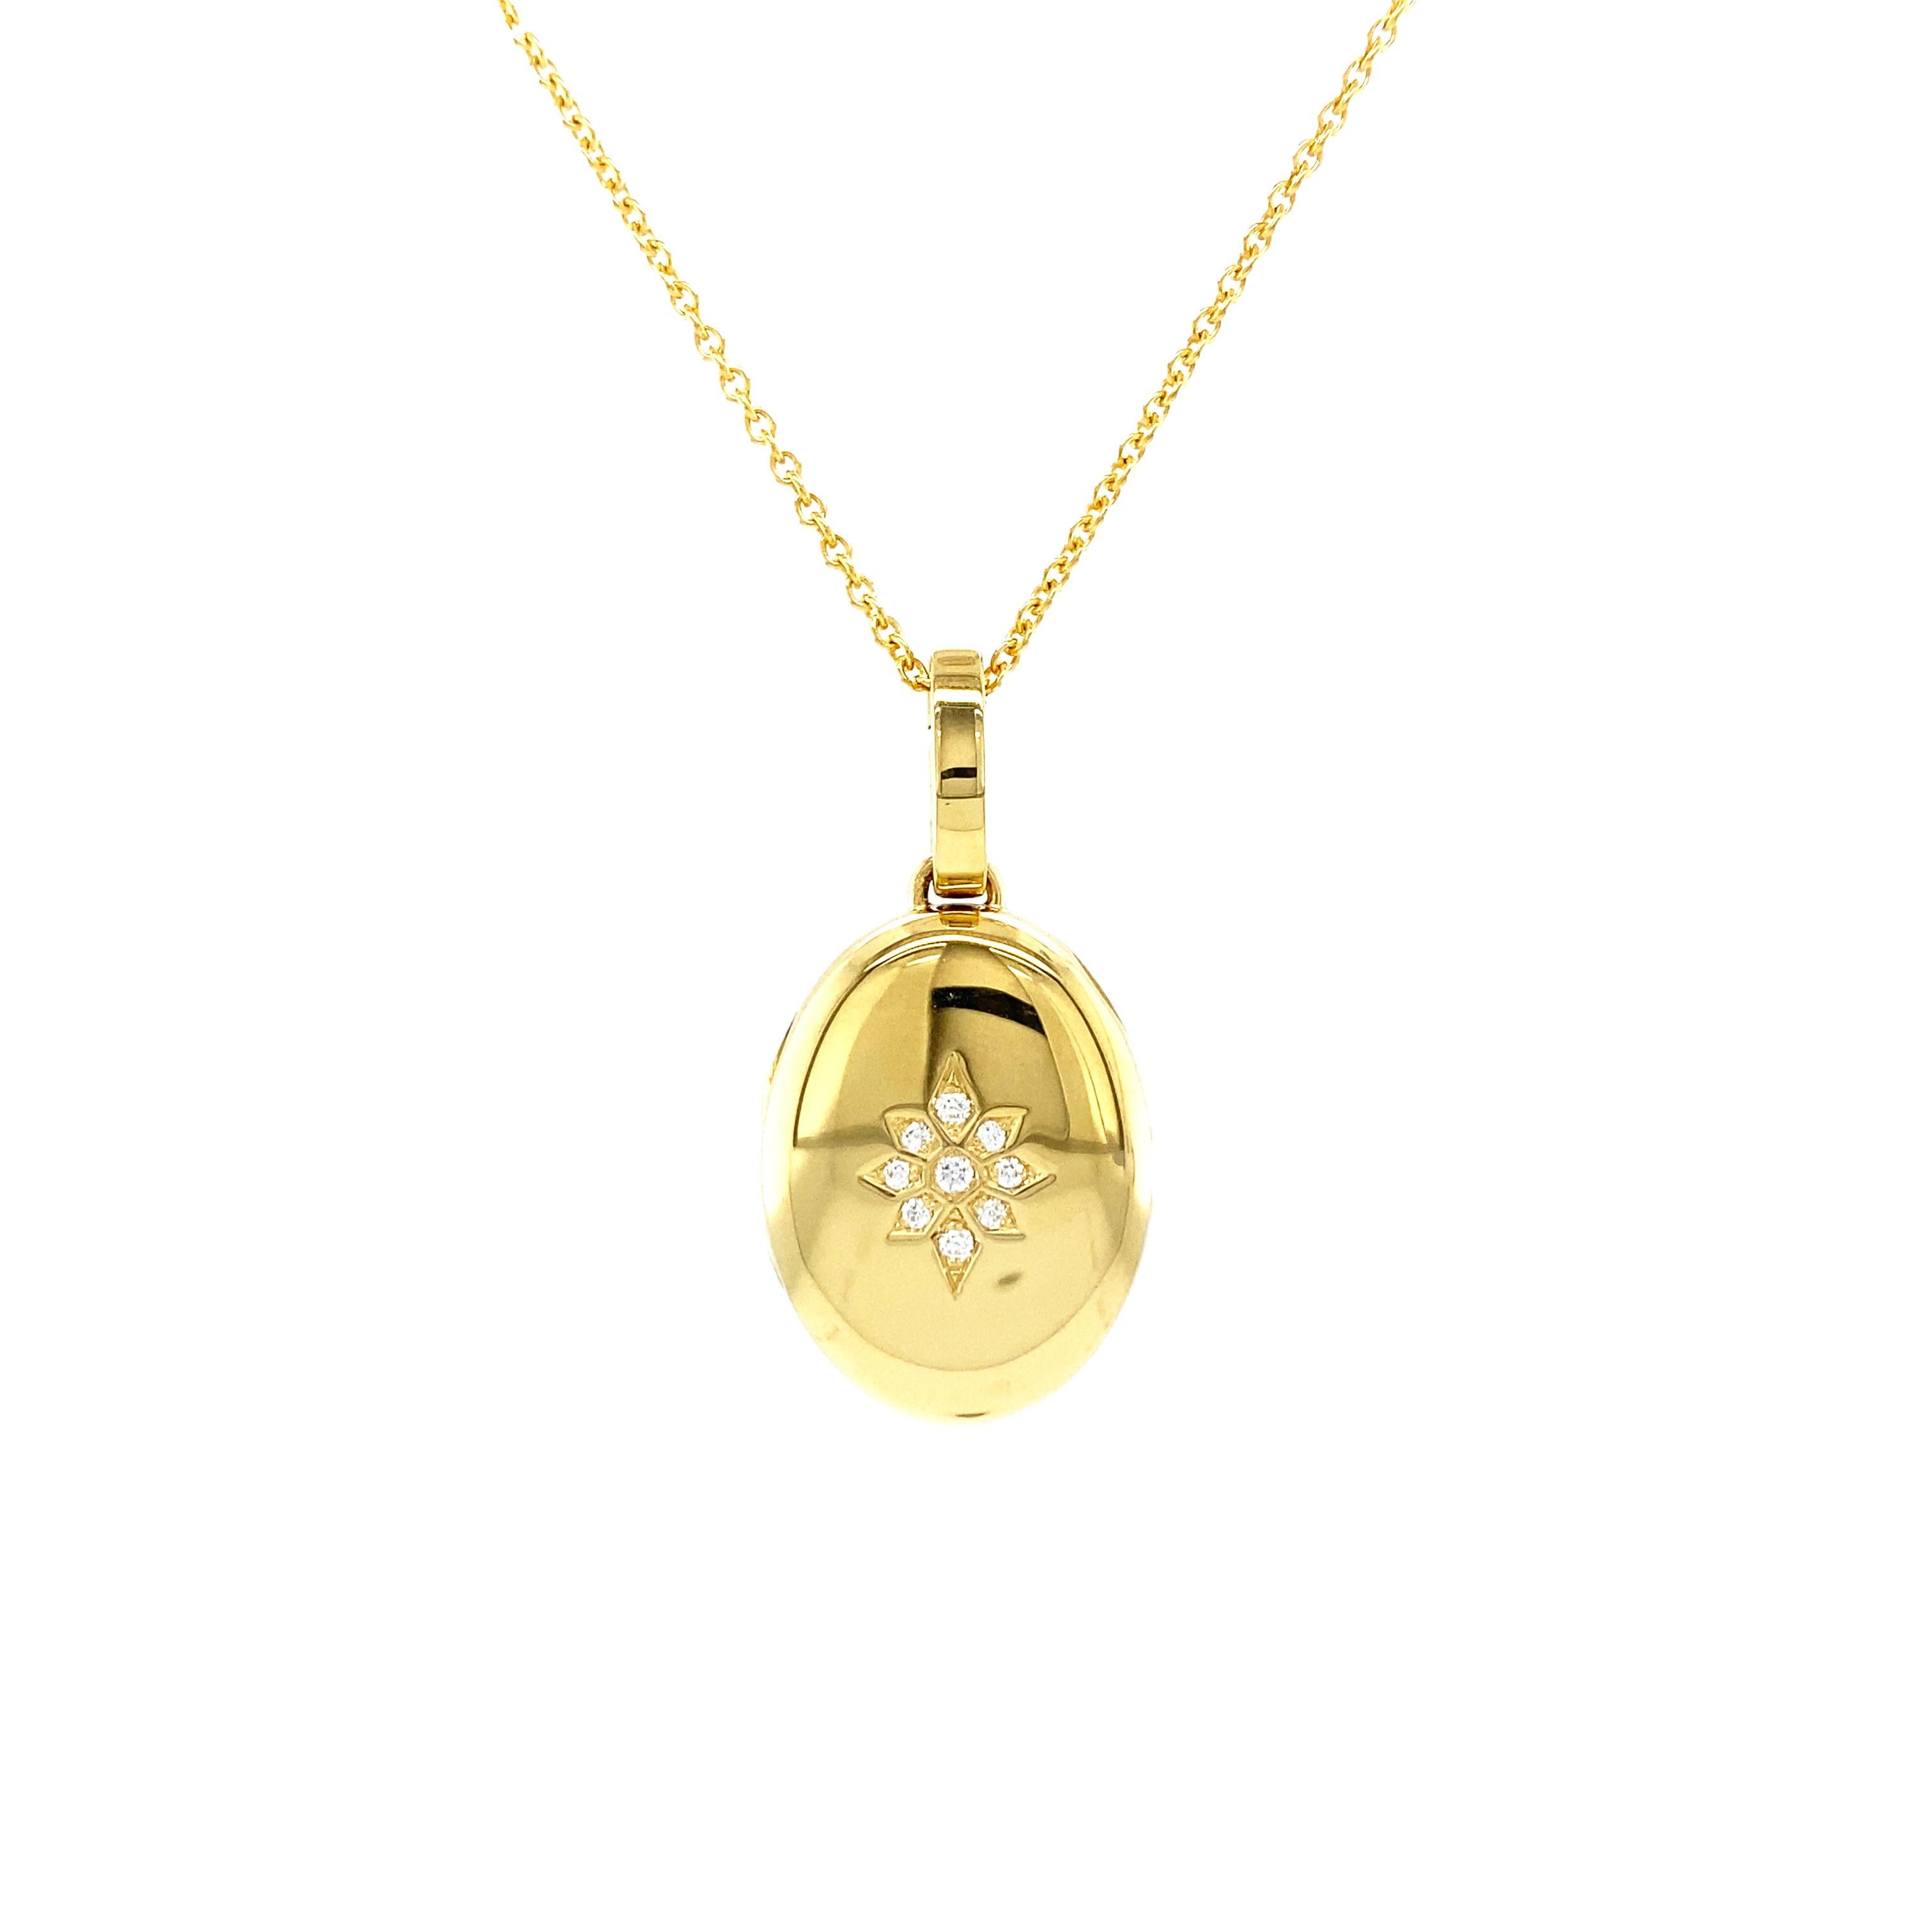 Brilliant Cut Heavy Oval Locket Pendant 18k Yellow Gold Star Motif with 9 Diamonds total 0.07 For Sale